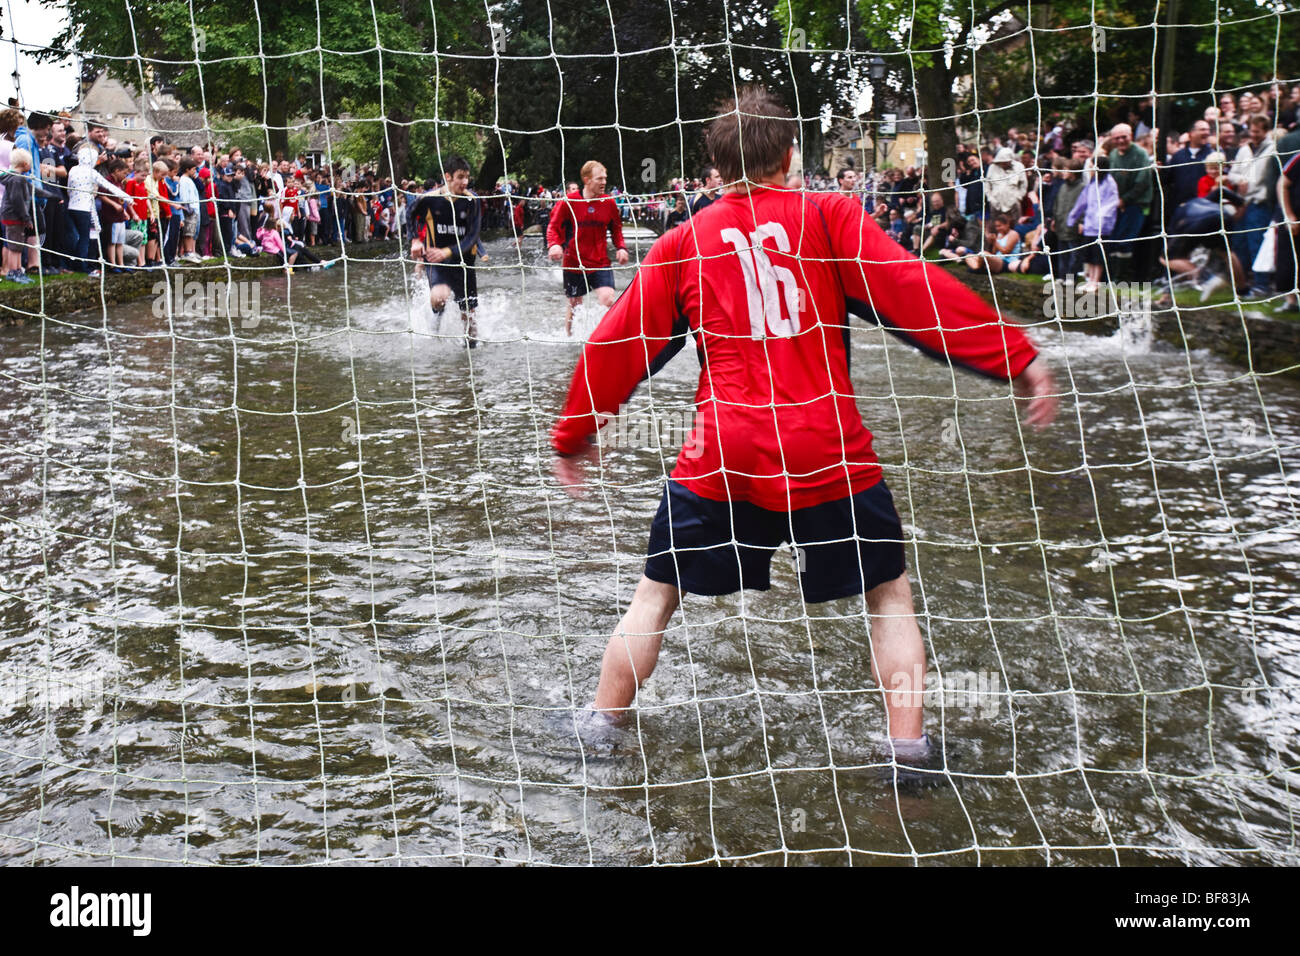 The Water Game - a football match in the River Windrush held every August Bank Holiday, Bourton-on-the-Water, UK Stock Photo